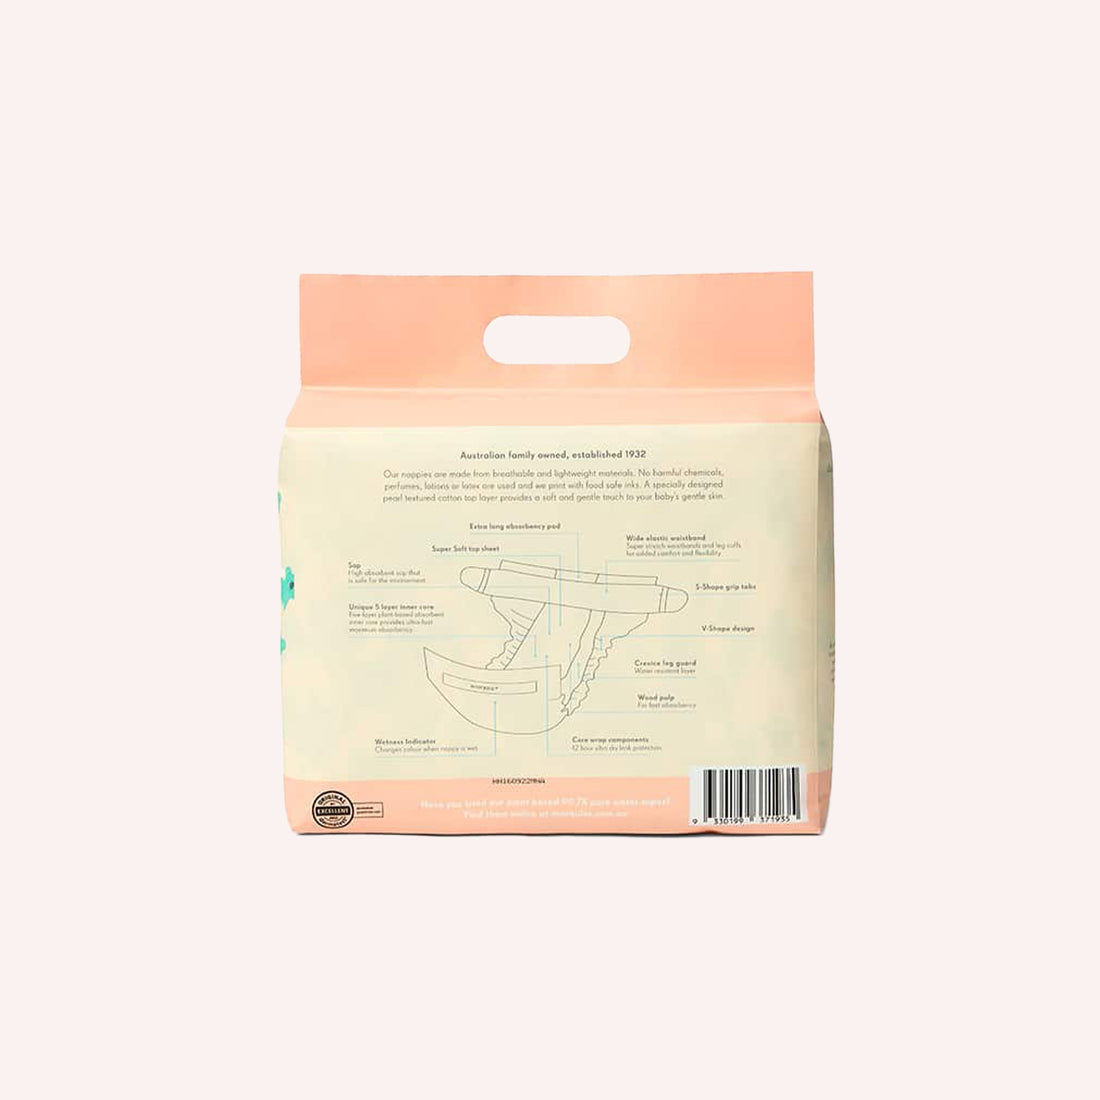 Marquise Eco Nappies